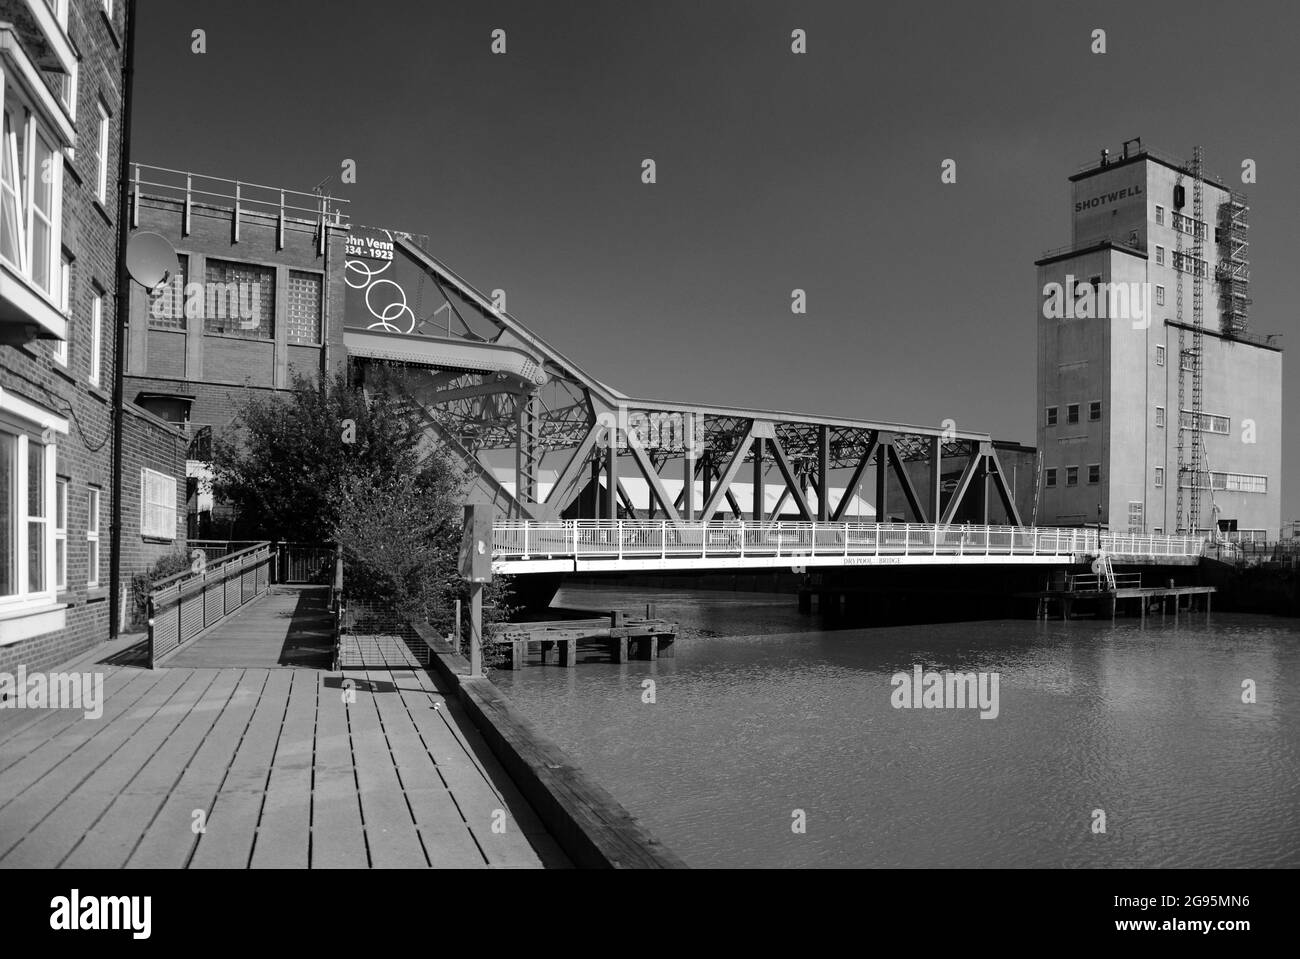 Drypool bridge, Scherzer-type rolling bascule bridge, constructed in 1961 over the river Hull, Clarence Street, Kingston Upon Hull Stock Photo